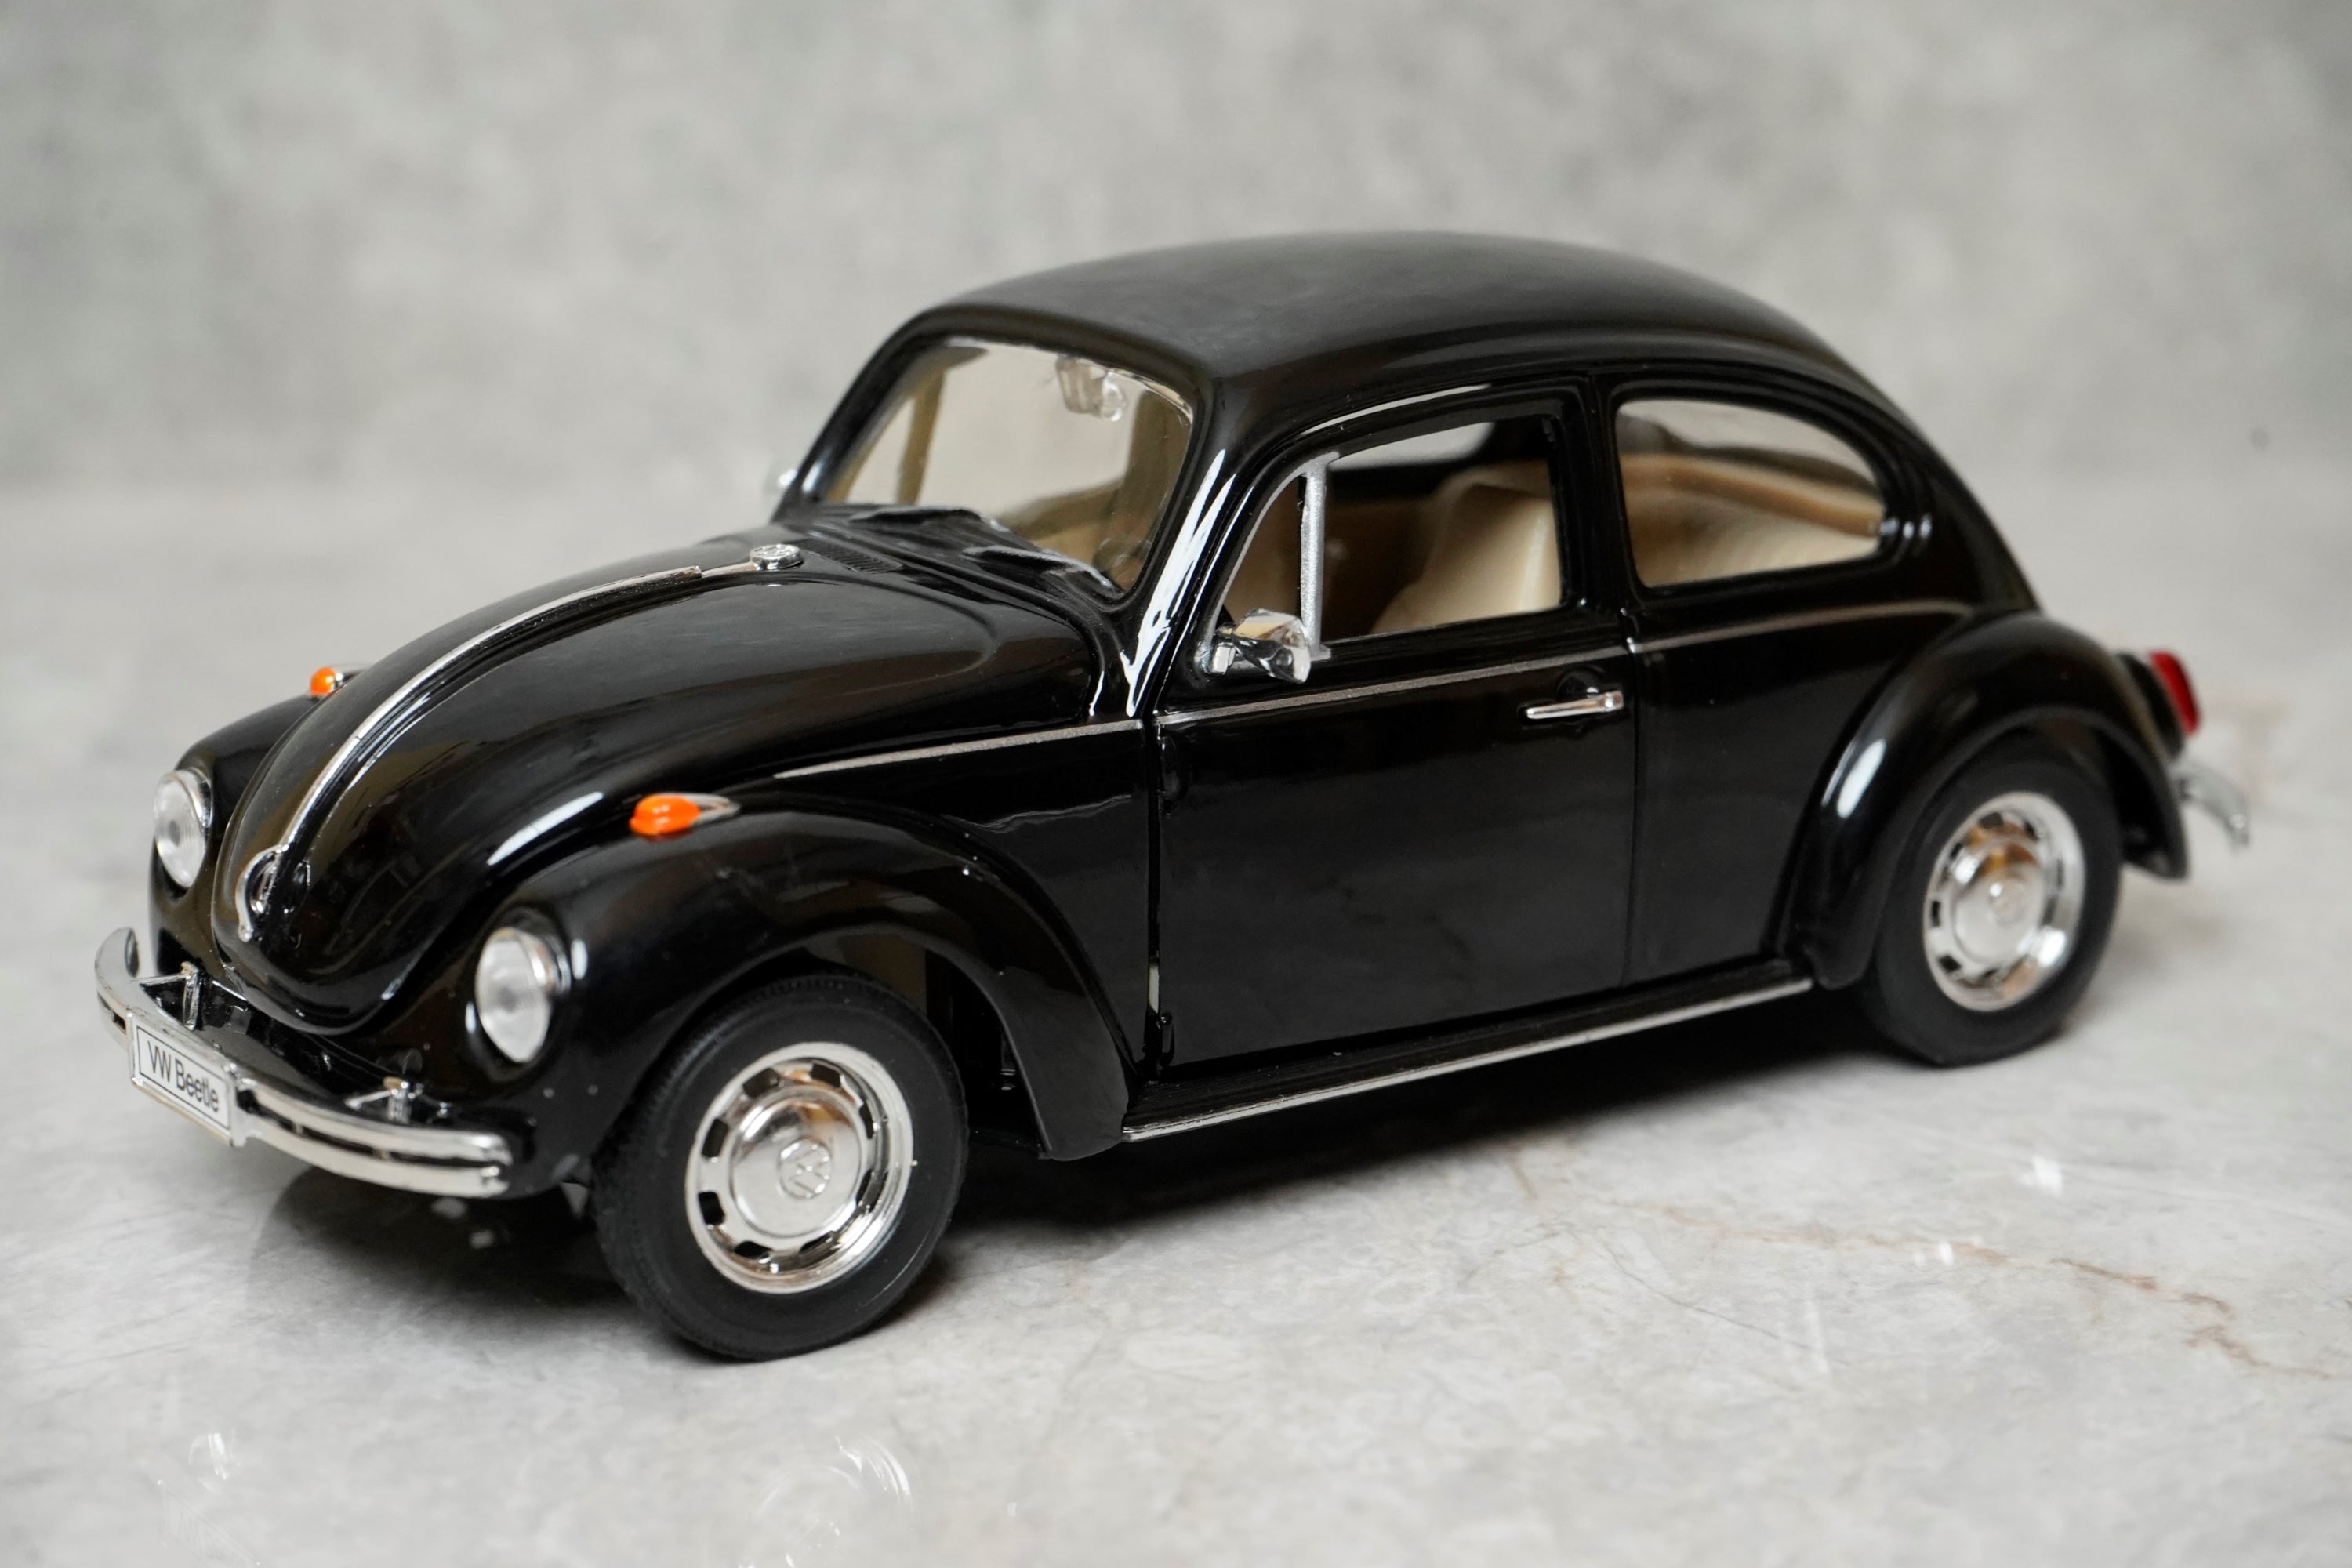 17cm Volkswagen Beetle Classic 1:24 Diecast Car Model By Welly